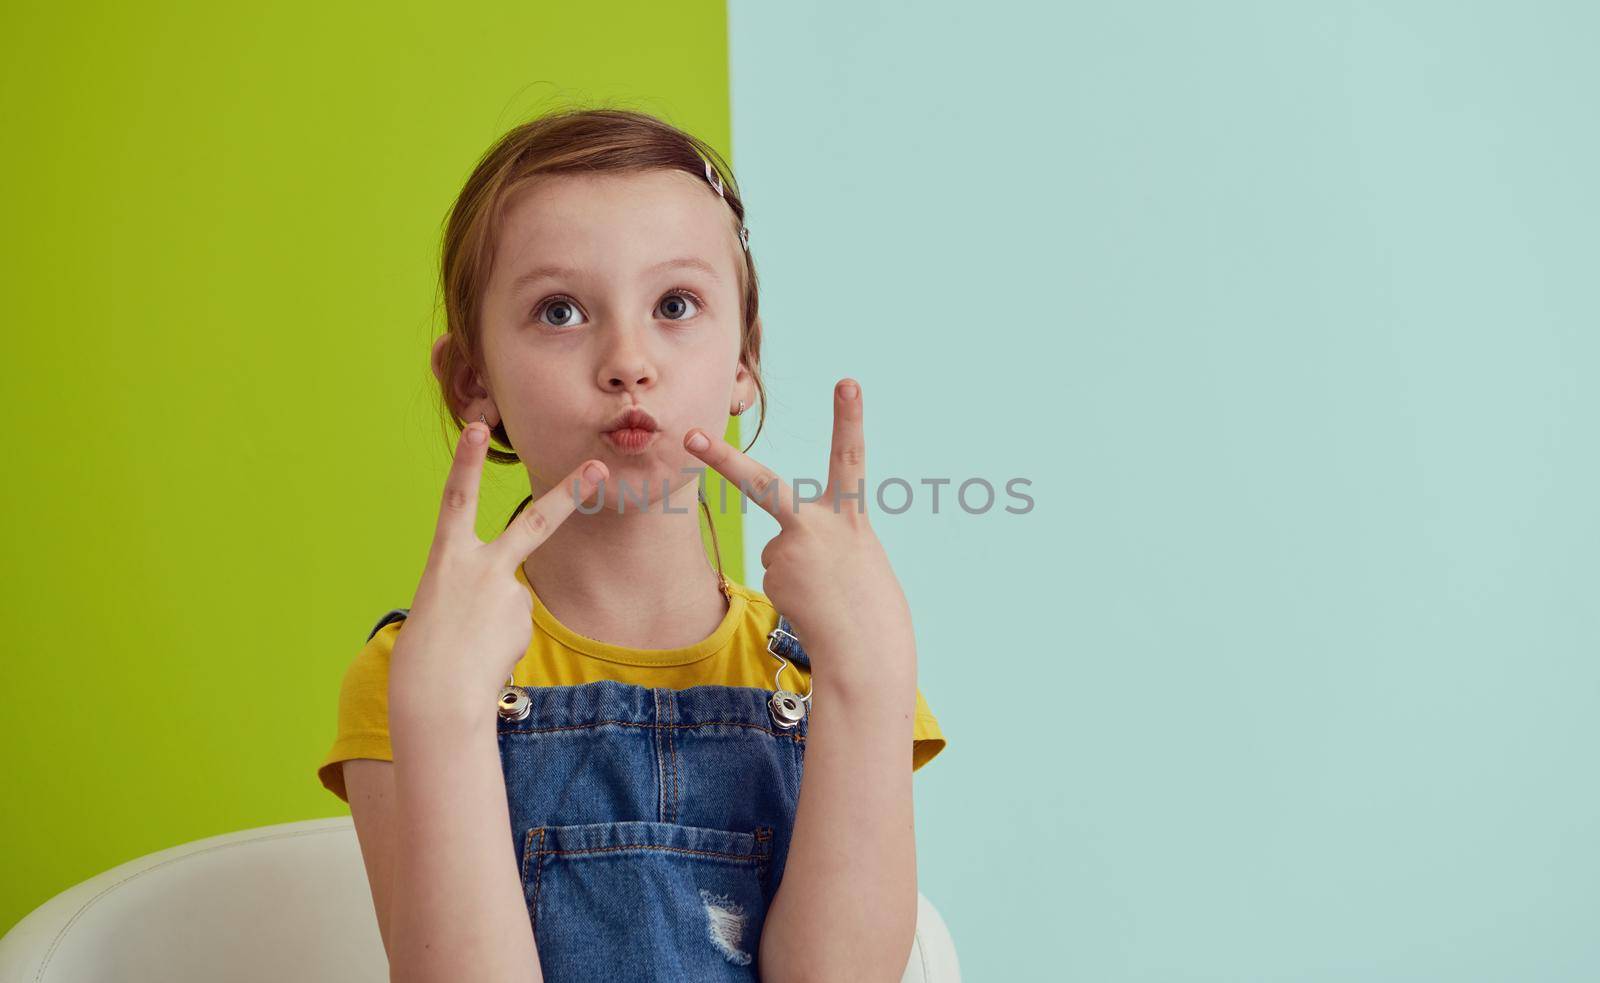 cute children portrait. Little girl smiling at home making funny face and acting